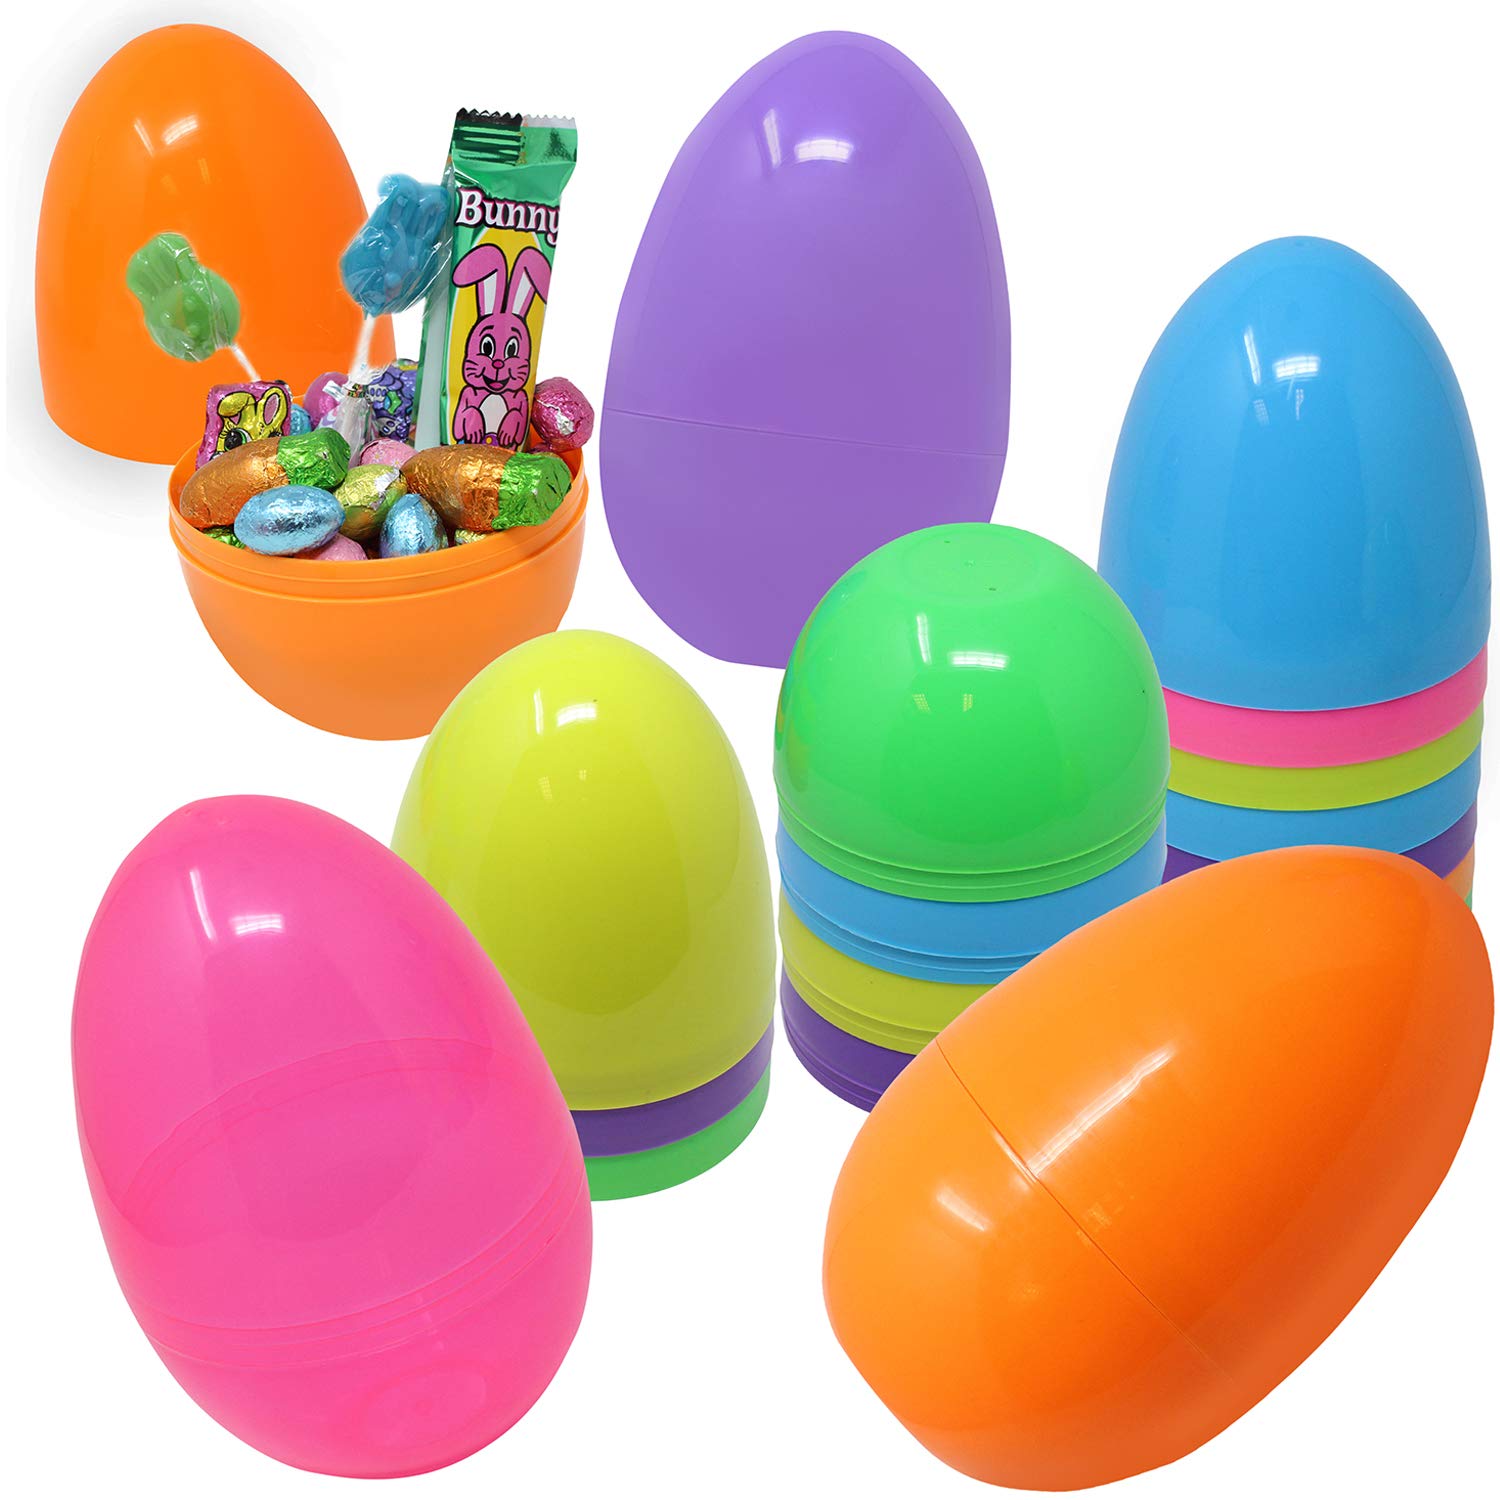 JOYIN 12 Pieces 7" Jumbo Plastic Bright Solid Easter Eggs Assorted Colors for Filling Treats, Easter Theme Party Favor, Easter Eggs Hunt, Basket Stuffers Fillers, Classroom Prize Supplies Toy - image 1 of 6